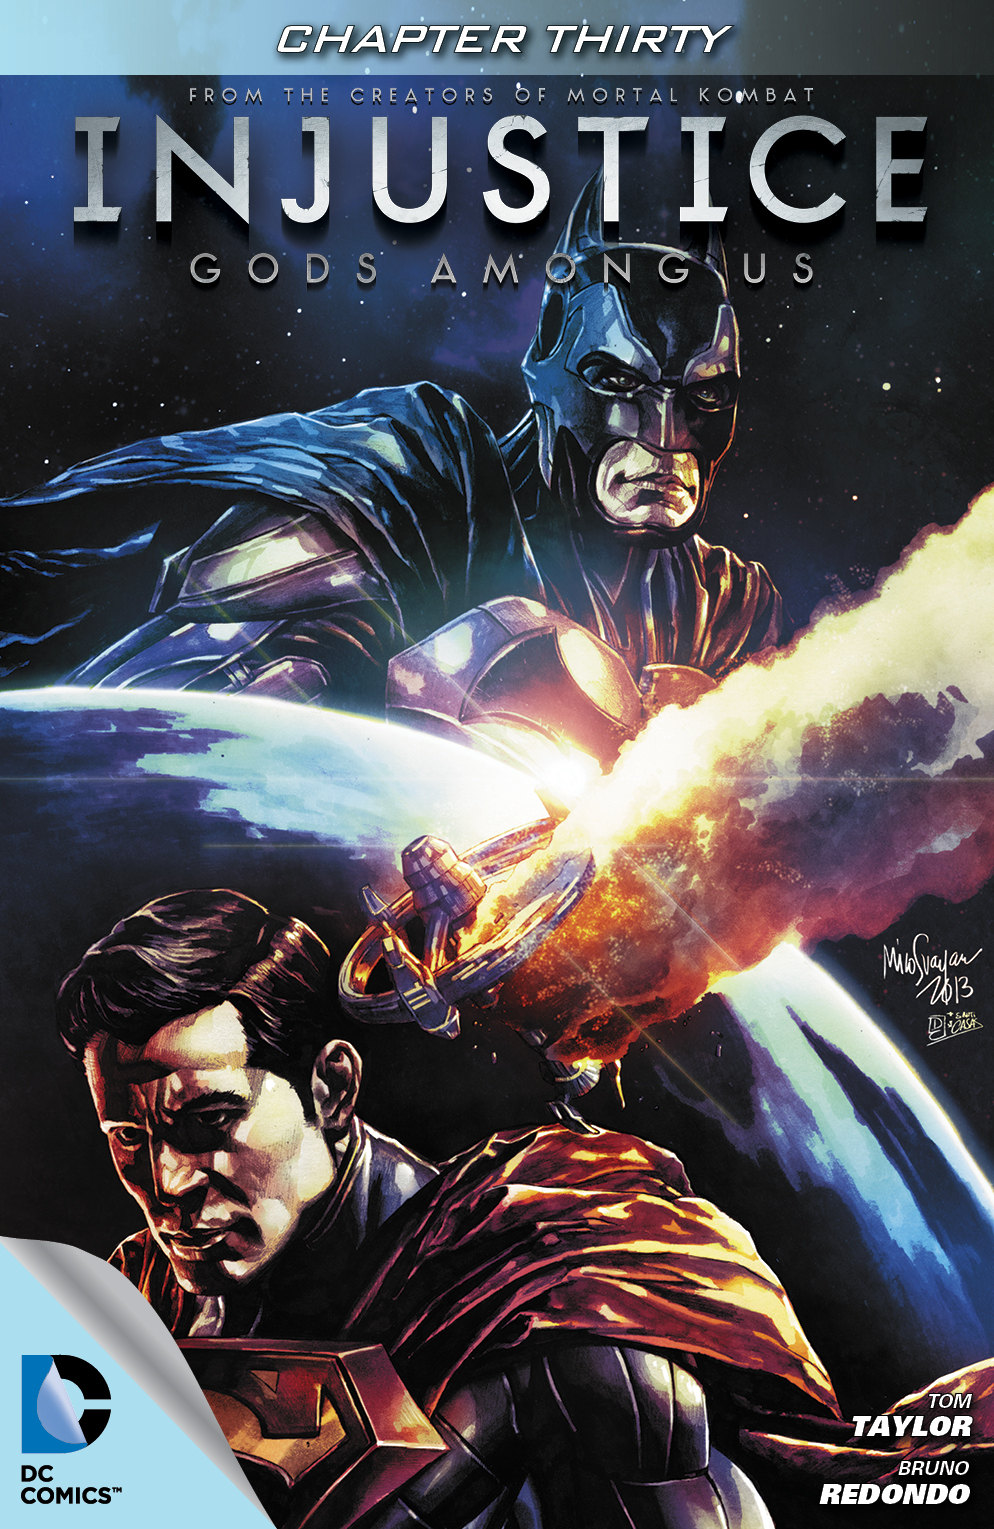 Injustice: Gods Among Us #30 preview images